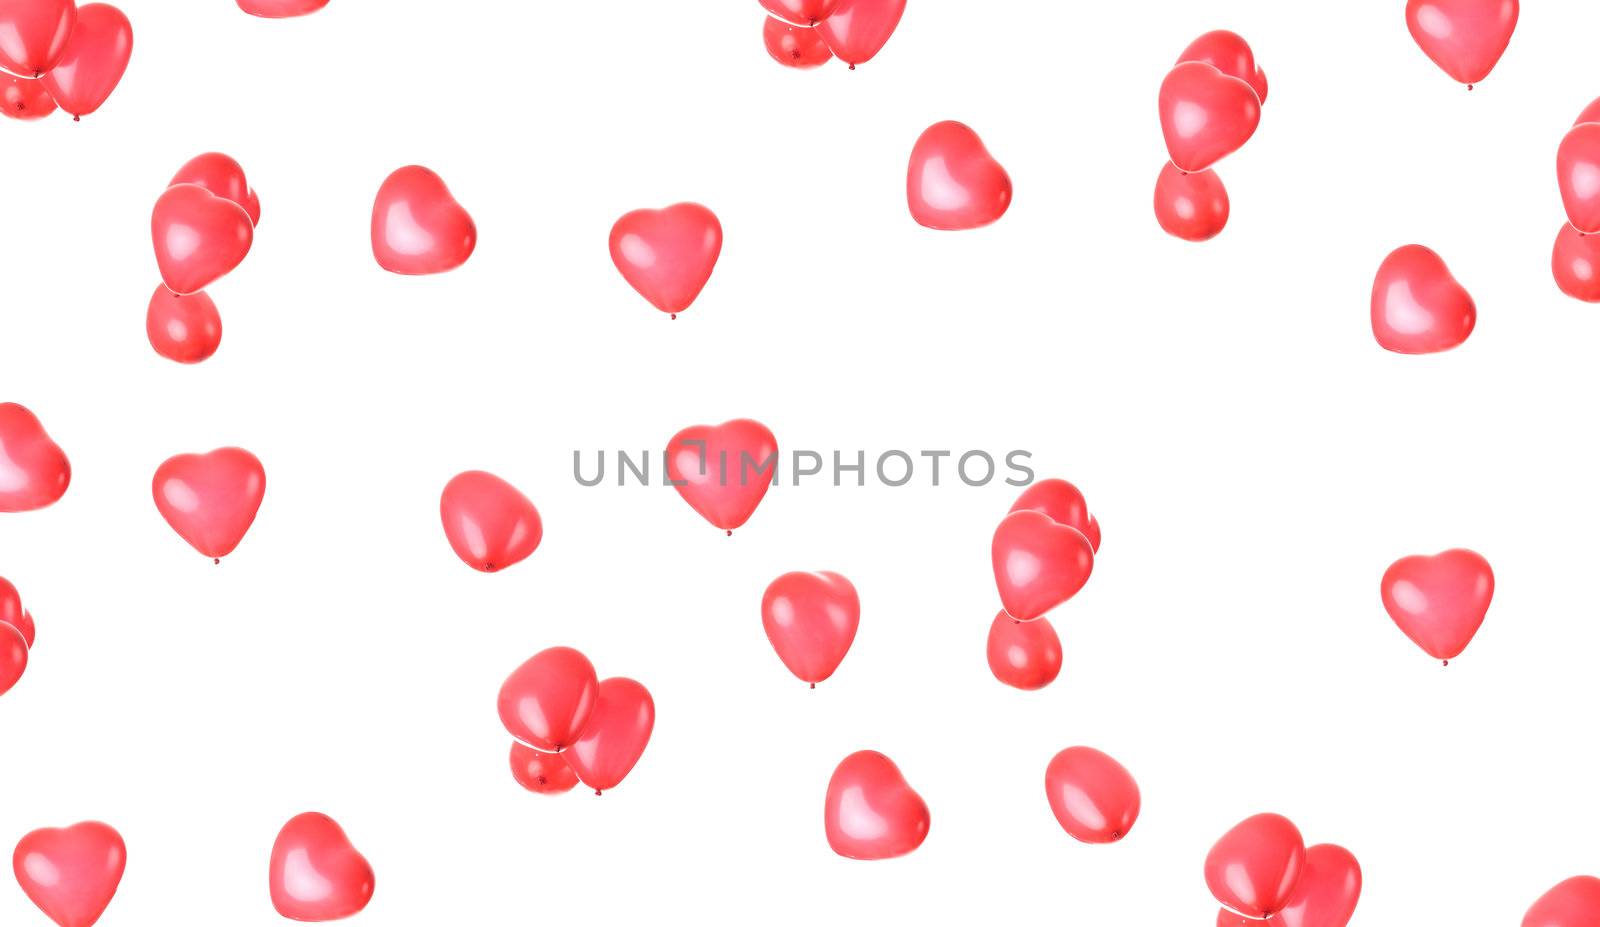 Heart shaped balloons over white background - valentines day background